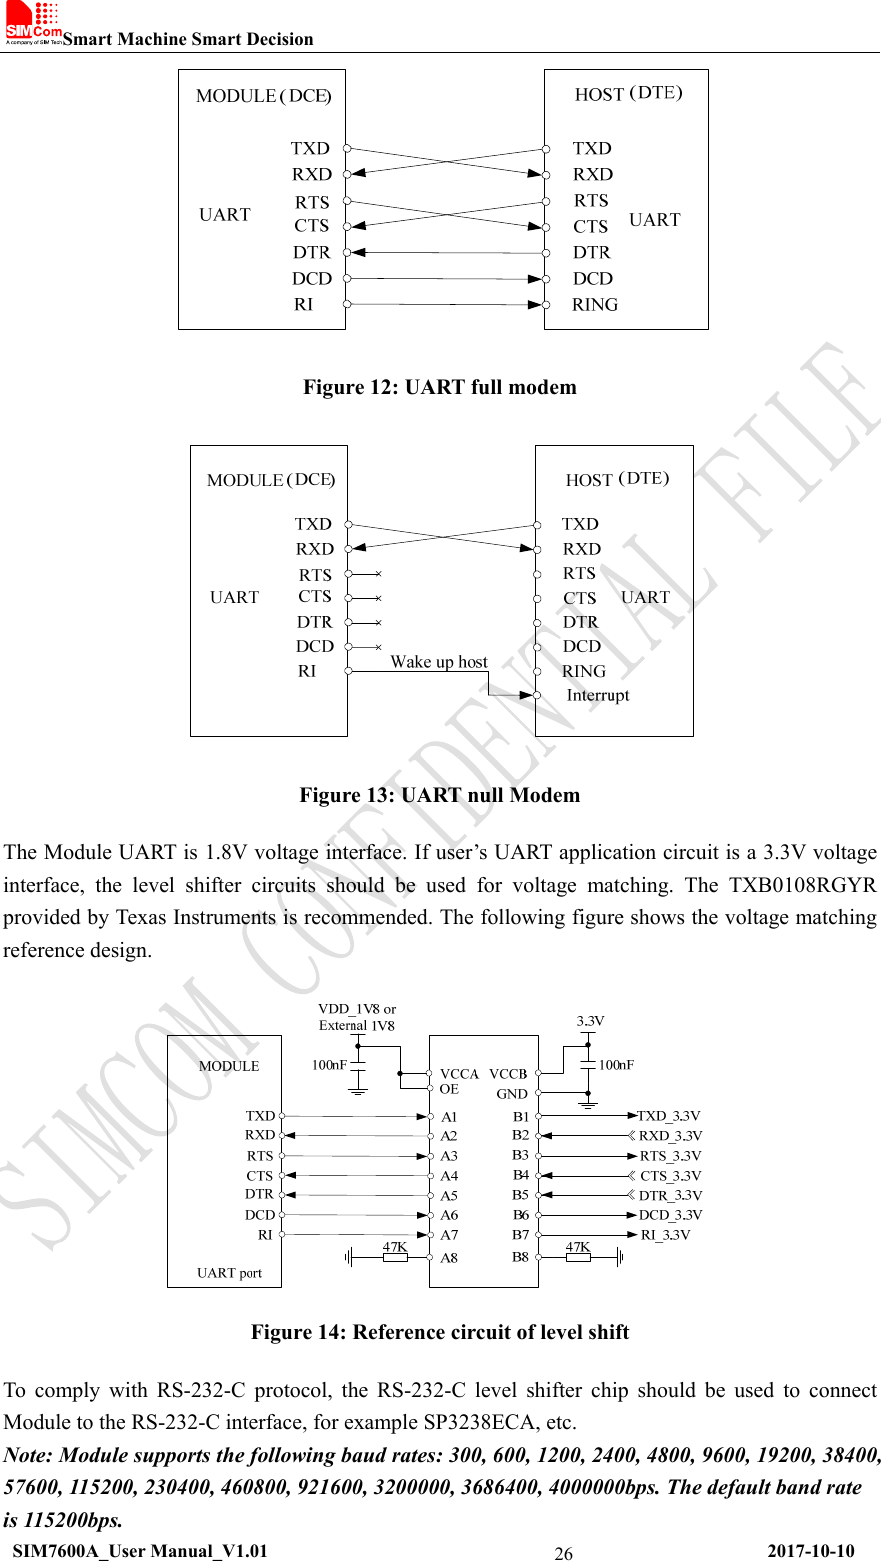 Smart Machine Smart Decision  SIM7600A_User Manual_V1.01                                                     2017-10-10 26 Figure 12: UART full modem  Figure 13: UART null Modem The Module UART is 1.8V voltage interface. If user’s UART application circuit is a 3.3V voltage interface, the level shifter circuits should be used for voltage matching. The TXB0108RGYR provided by Texas Instruments is recommended. The following figure shows the voltage matching reference design.   Figure 14: Reference circuit of level shift To comply with RS-232-C protocol, the RS-232-C level shifter chip should be used to connect Module to the RS-232-C interface, for example SP3238ECA, etc. Note: Module supports the following baud rates: 300, 600, 1200, 2400, 4800, 9600, 19200, 38400, 57600, 115200, 230400, 460800, 921600, 3200000, 3686400, 4000000bps. The default band rate is 115200bps. 